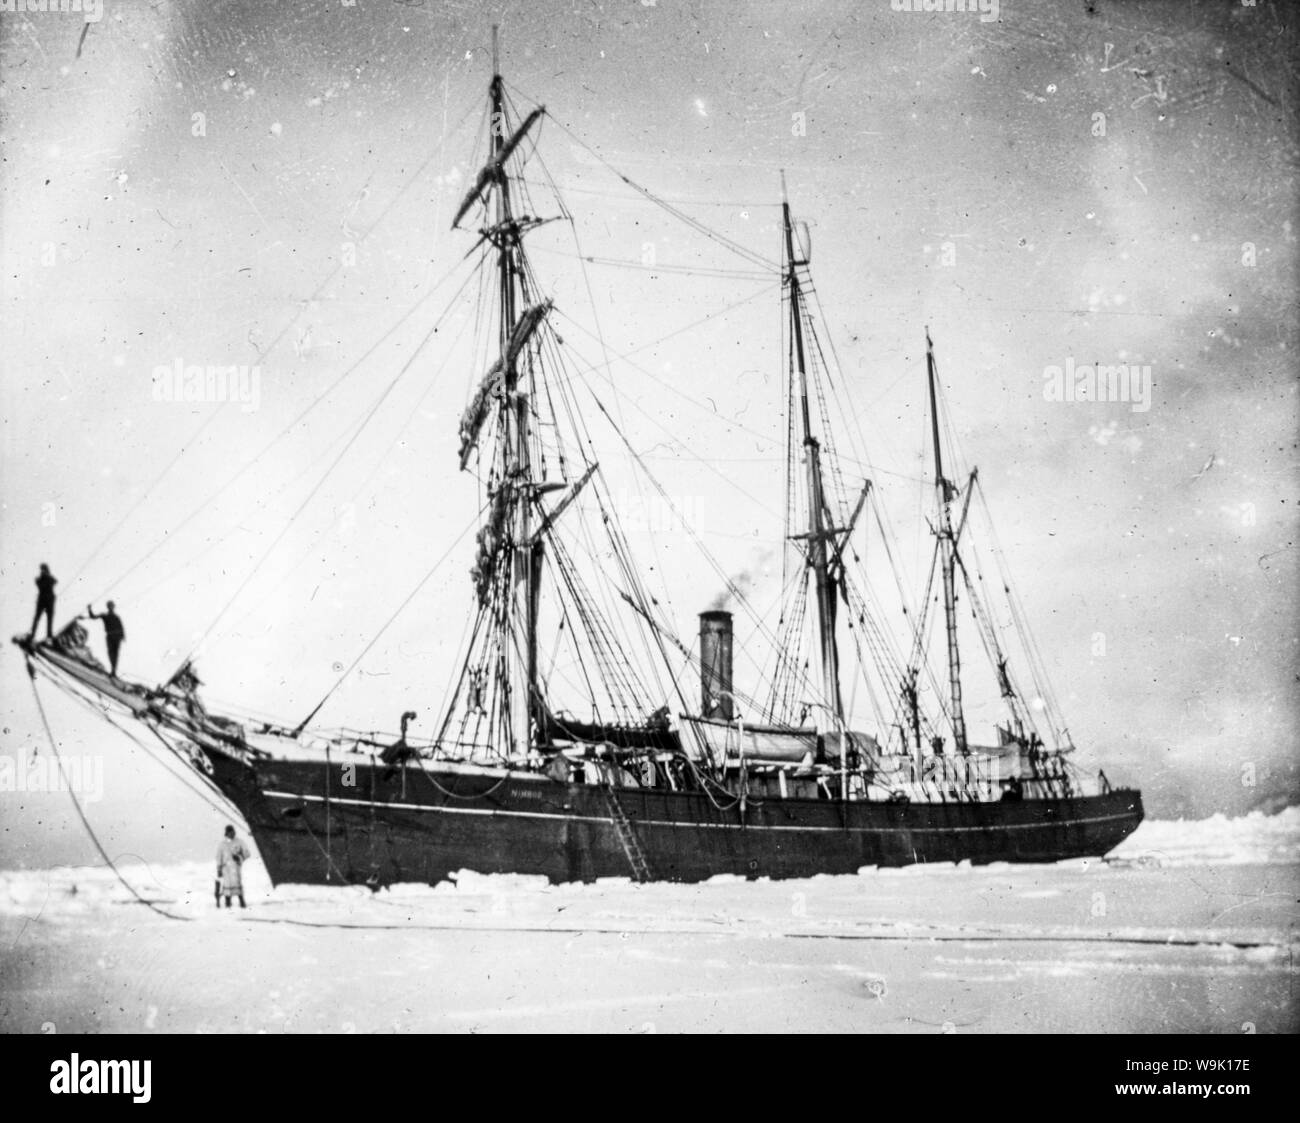 Ernest Shackleton's ship Nimrod held up in the Ice on the Nimrod Expedition to the South Pole in 1908-1909, photograph Stock Photo